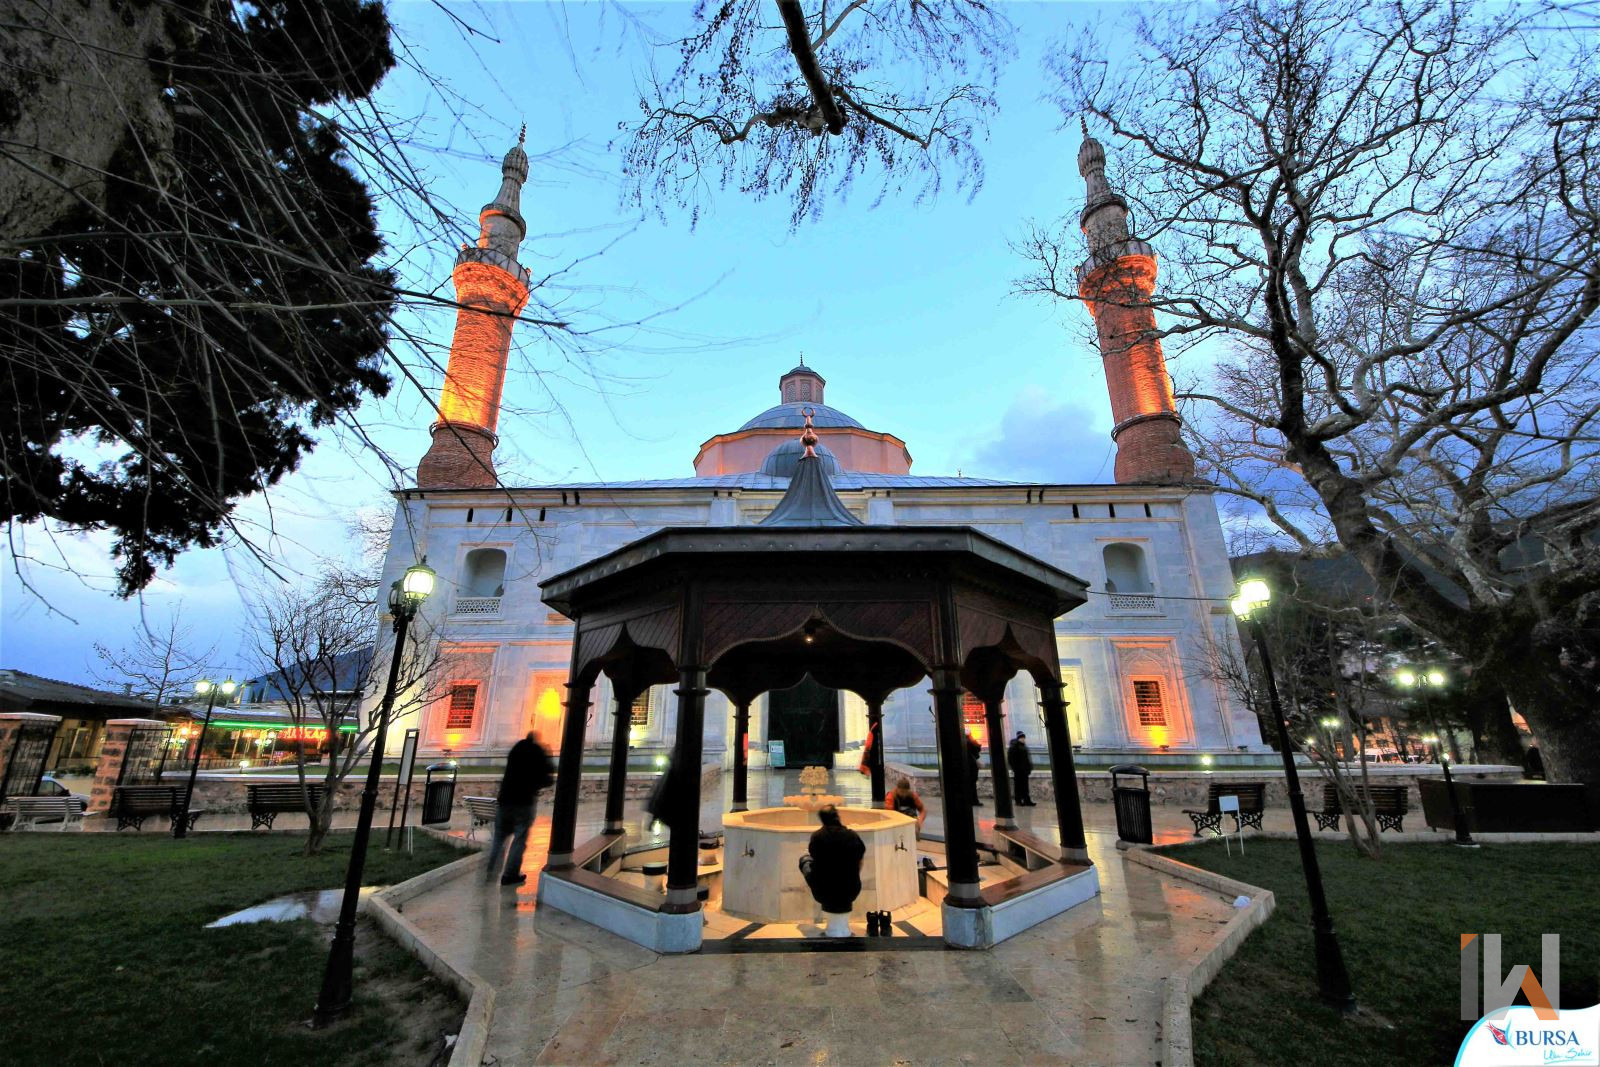 <h3>GREEN MOSQUE</h3>Green Mosque is an example of early Ottoman architecture, built by Sultan Mehmet I between 1419 and 1421. It is not only a mosque, but also part of a large social complex. It includes structures such as madrasahs, mausoleums, soup kitchens and baths. Sultan Mehmed I and his son II. Murad was buried in the tomb called Green Tomb here. The Green Mosque got its name from the tiles painted with green ink inside. This important structure is also included in UNESCO's World Heritage List.